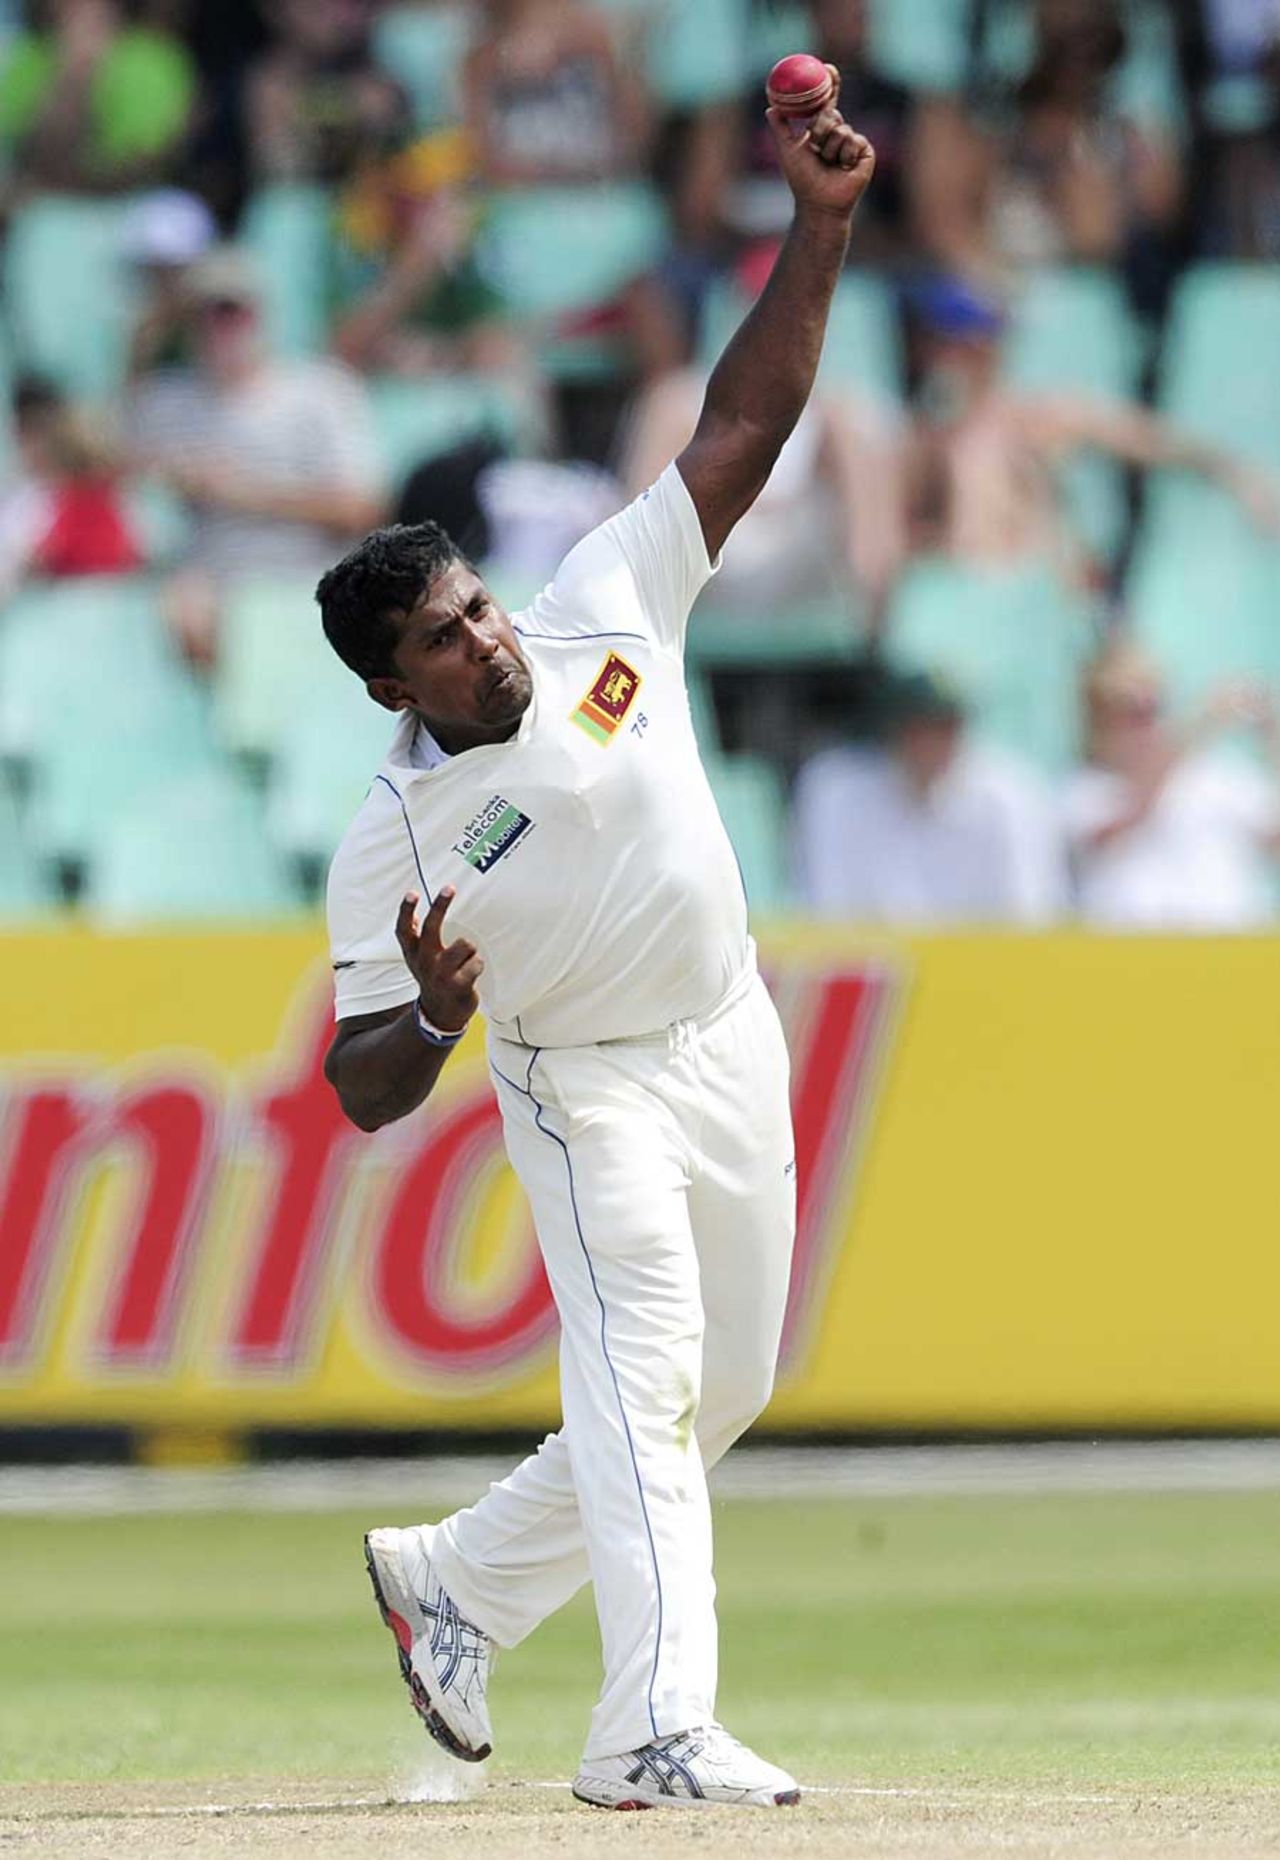 Rangana Herath dismissed Mark Boucher and Ashwell Prince in fairly quick succession, South Africa v Sri Lanka, 2nd Test, Durban, 2nd day, December 27, 2011